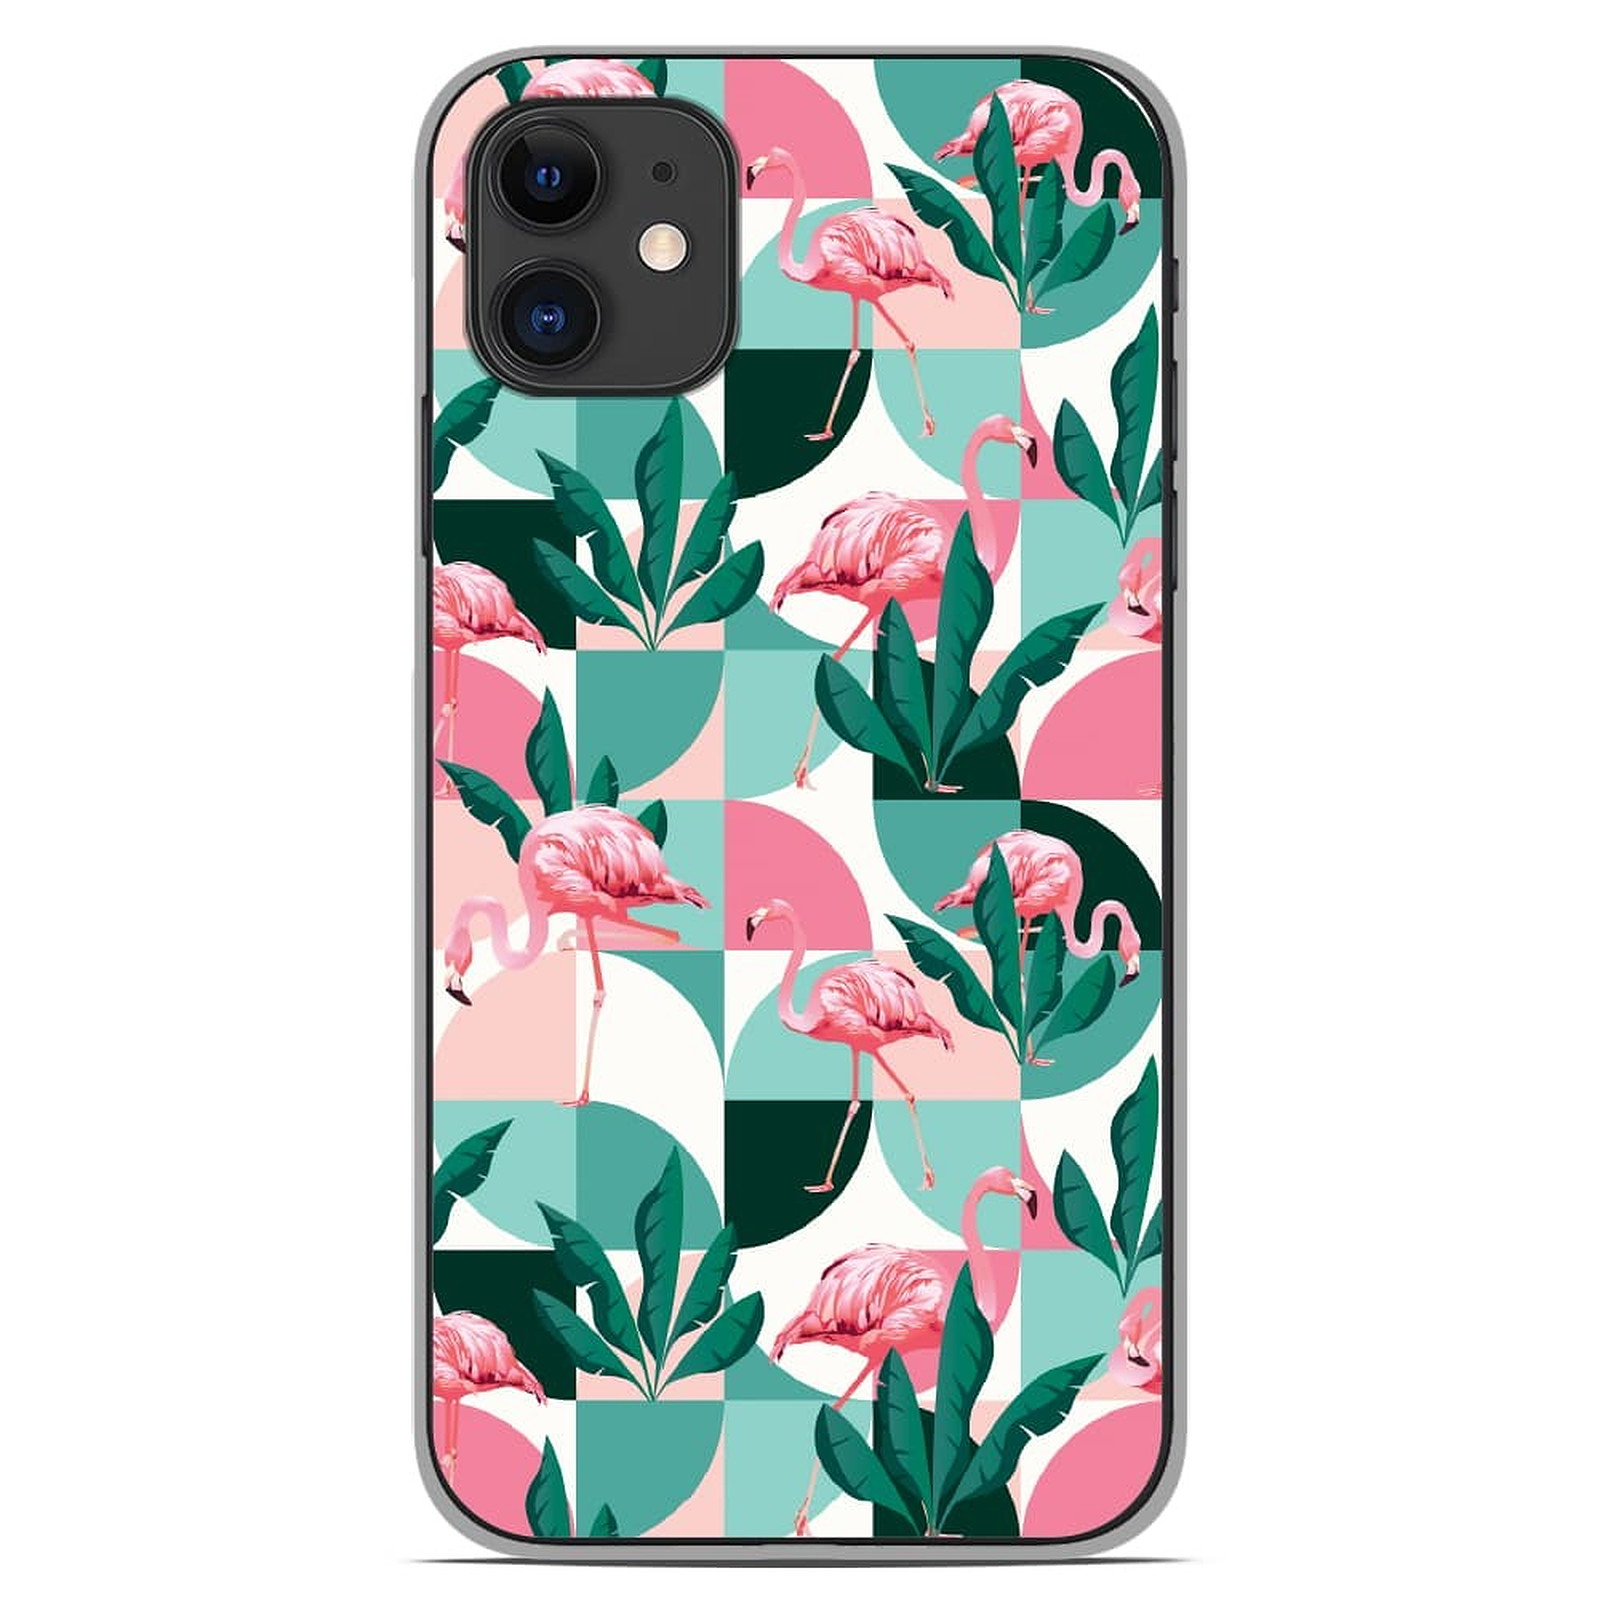 1001 Coques Coque silicone gel Apple iPhone 11 motif Flamants Roses ge´ome´trique - Coque telephone 1001Coques